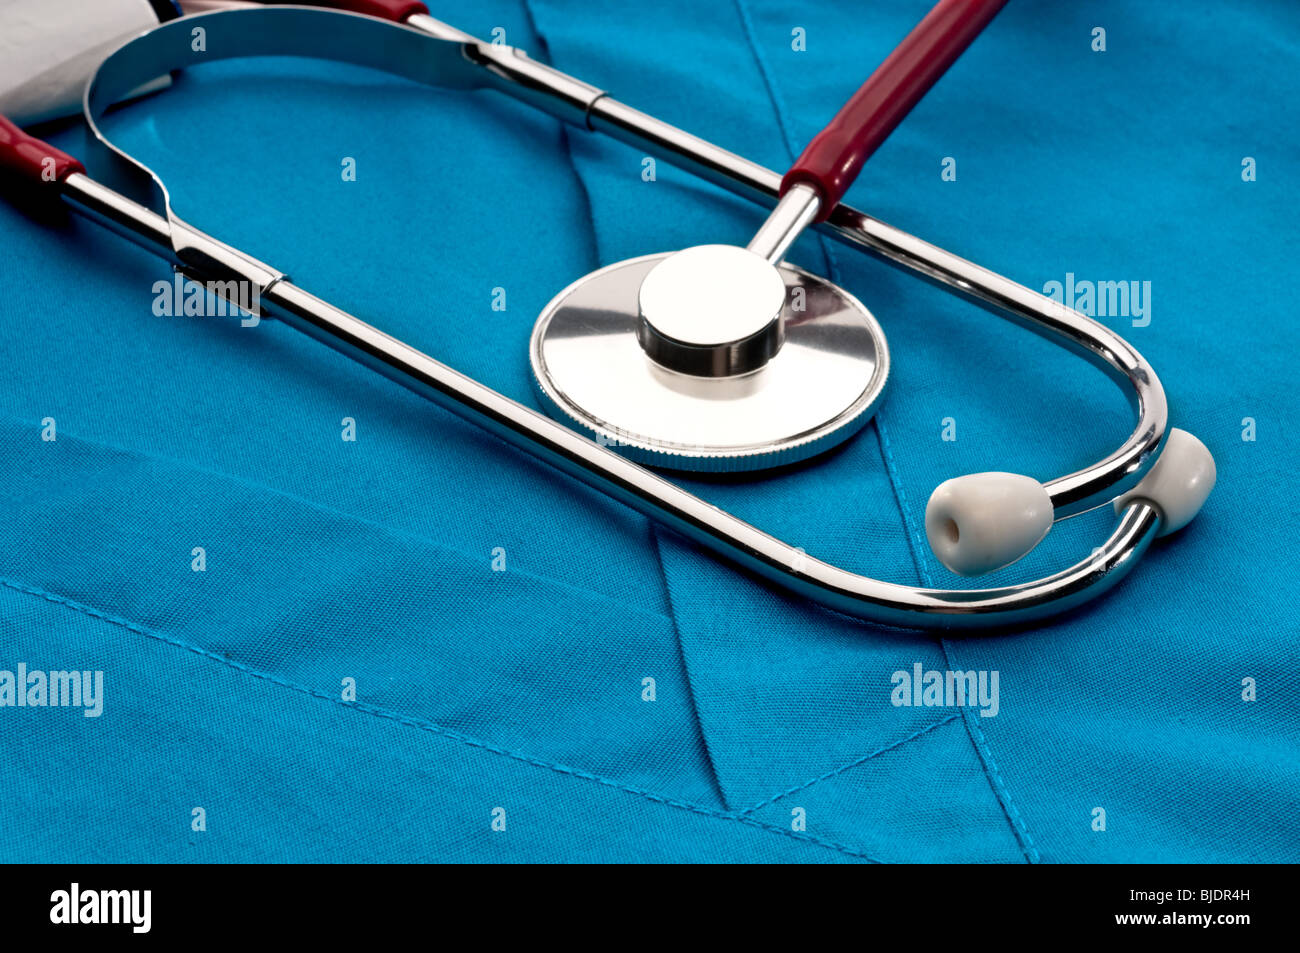 A stethoscope on blue doctor's medical scrubs Stock Photo